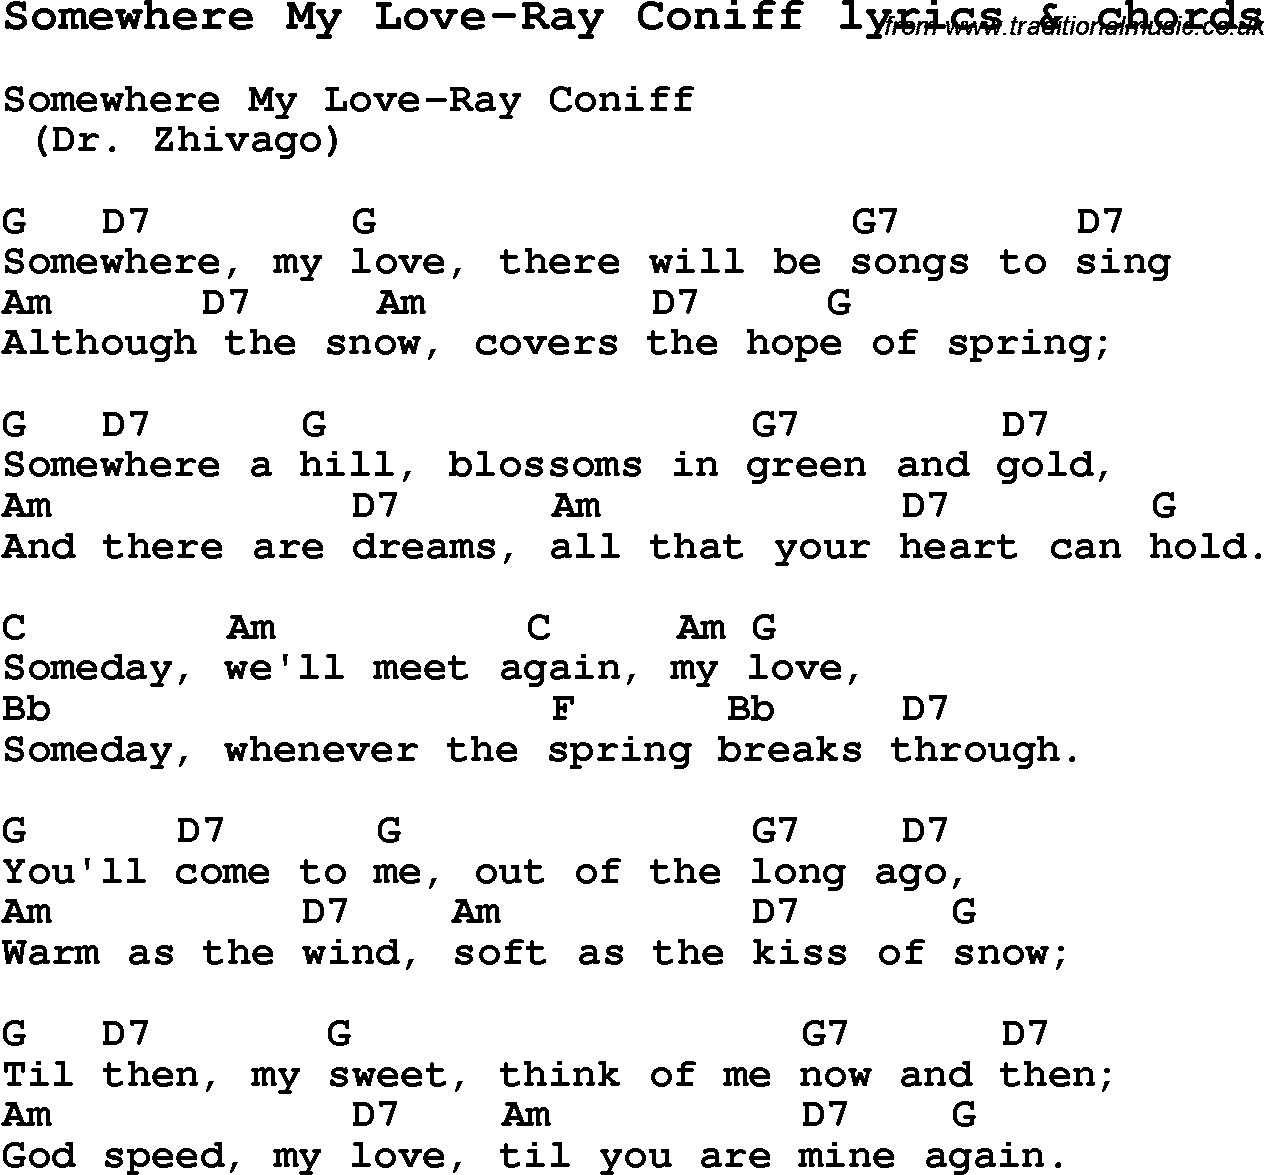 Love Song Lyrics for: Somewhere My Love-Ray Coniff with chords for Ukulele, Guitar Banjo etc.